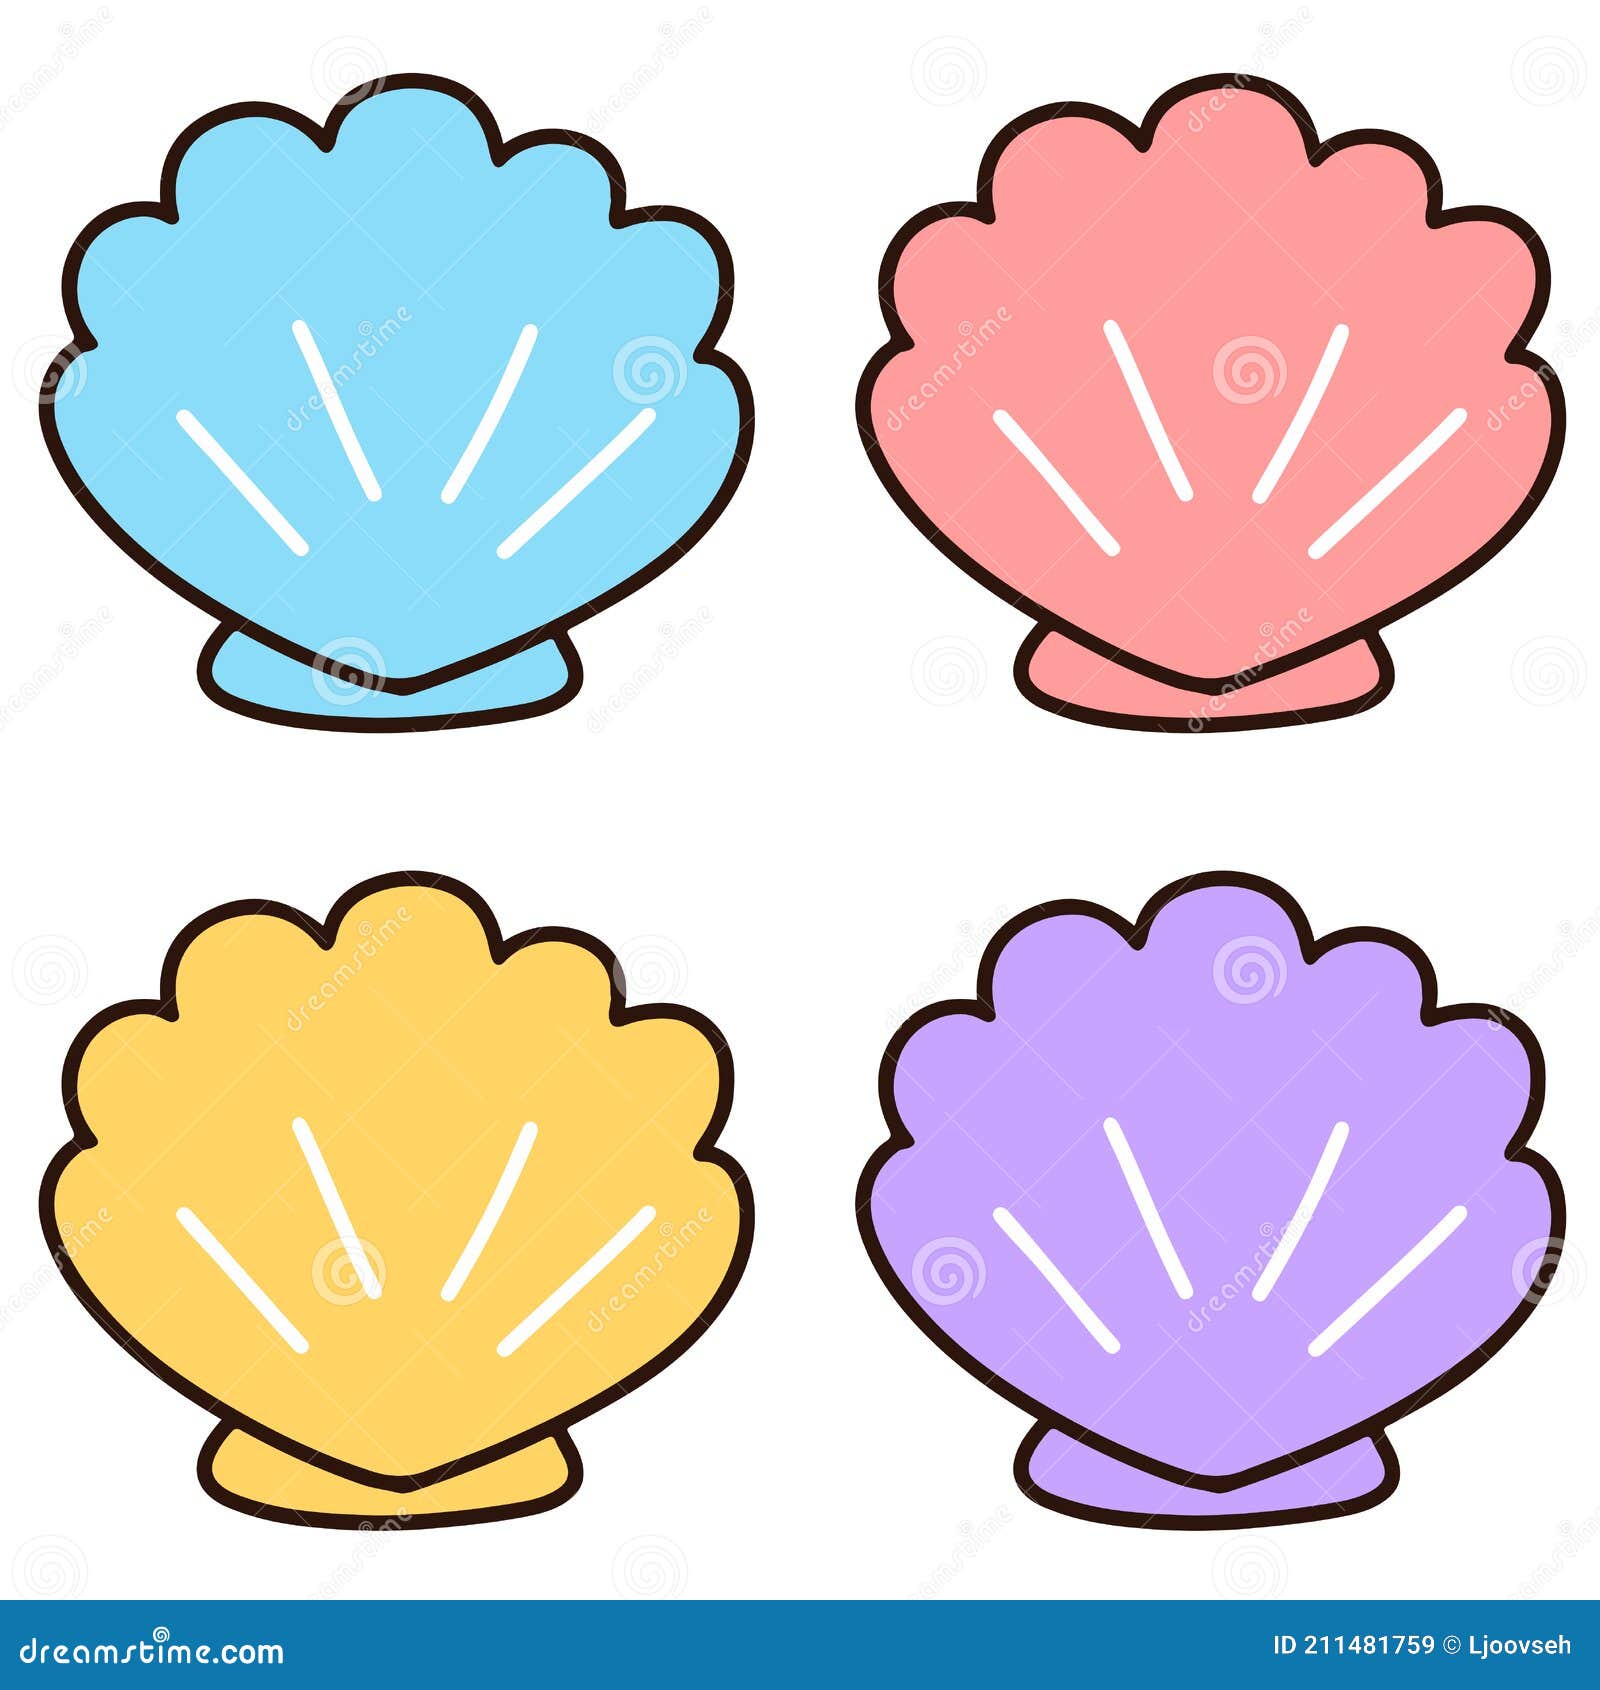 Simple and Adorable Pastel Colored Seashells with Outlines Stock Vector ...